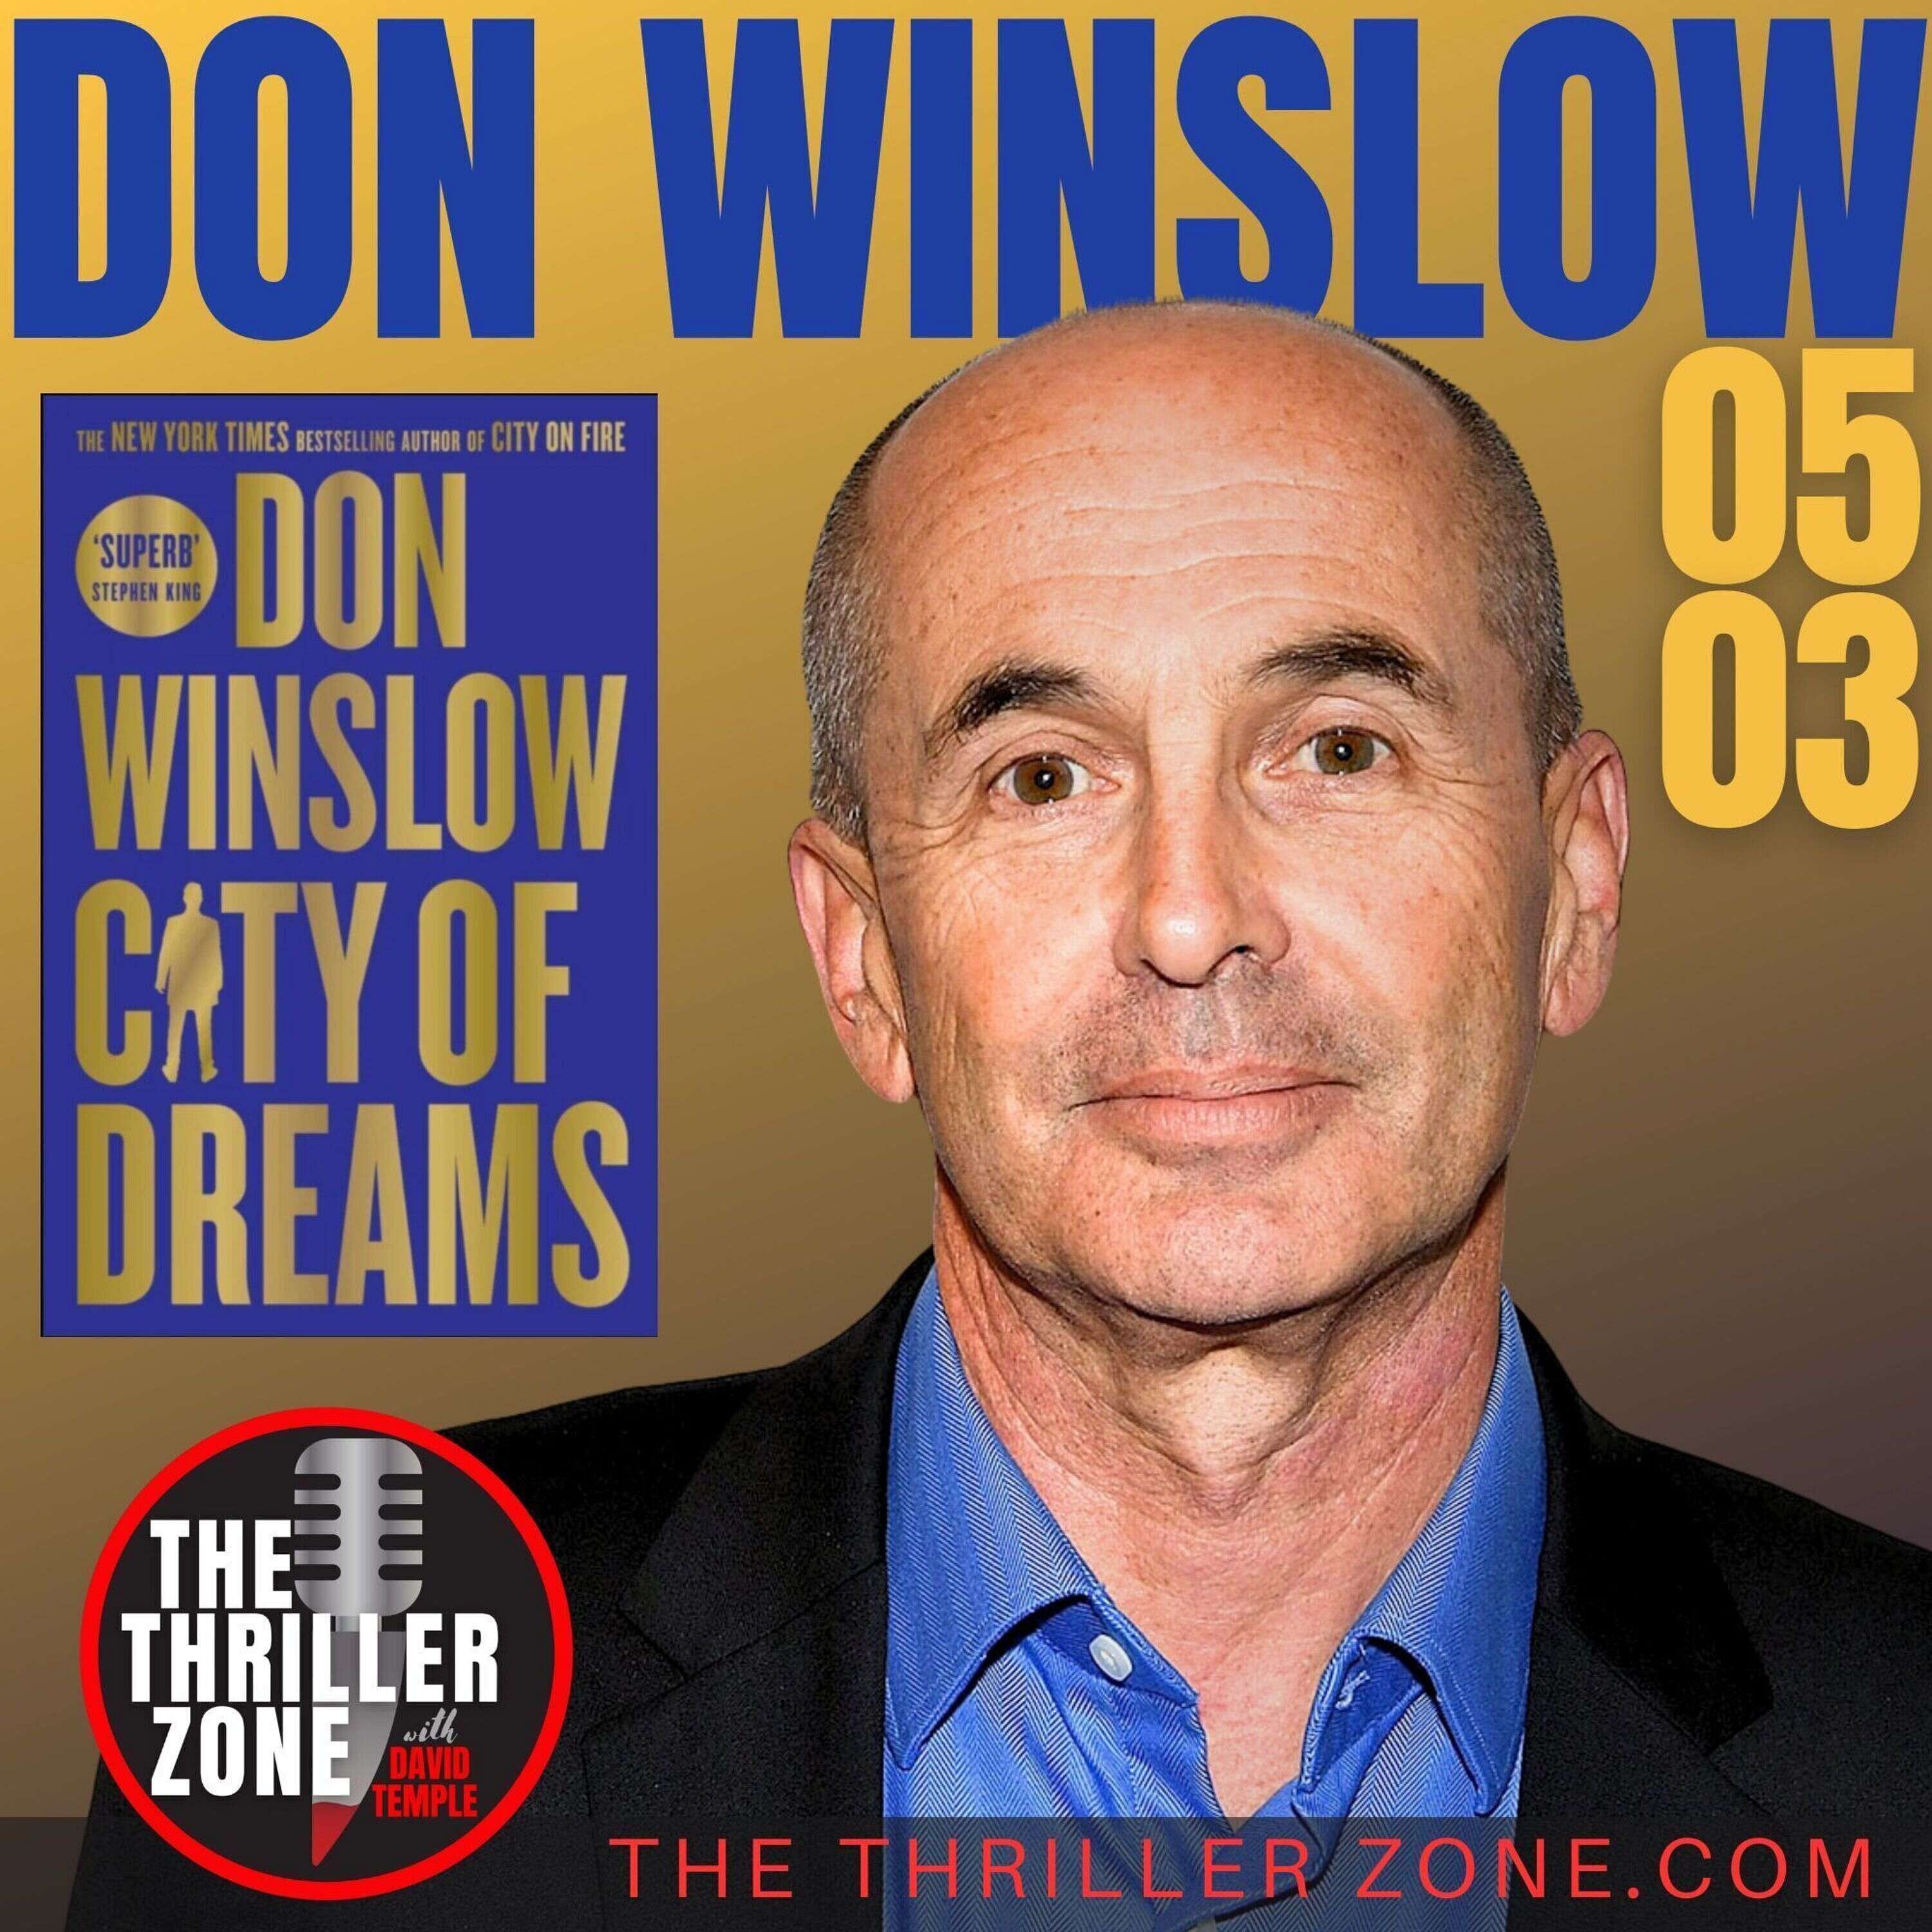 New York Times bestselling author Don Winslow of City of Dreams The Thriller Zone Podcast David Temple